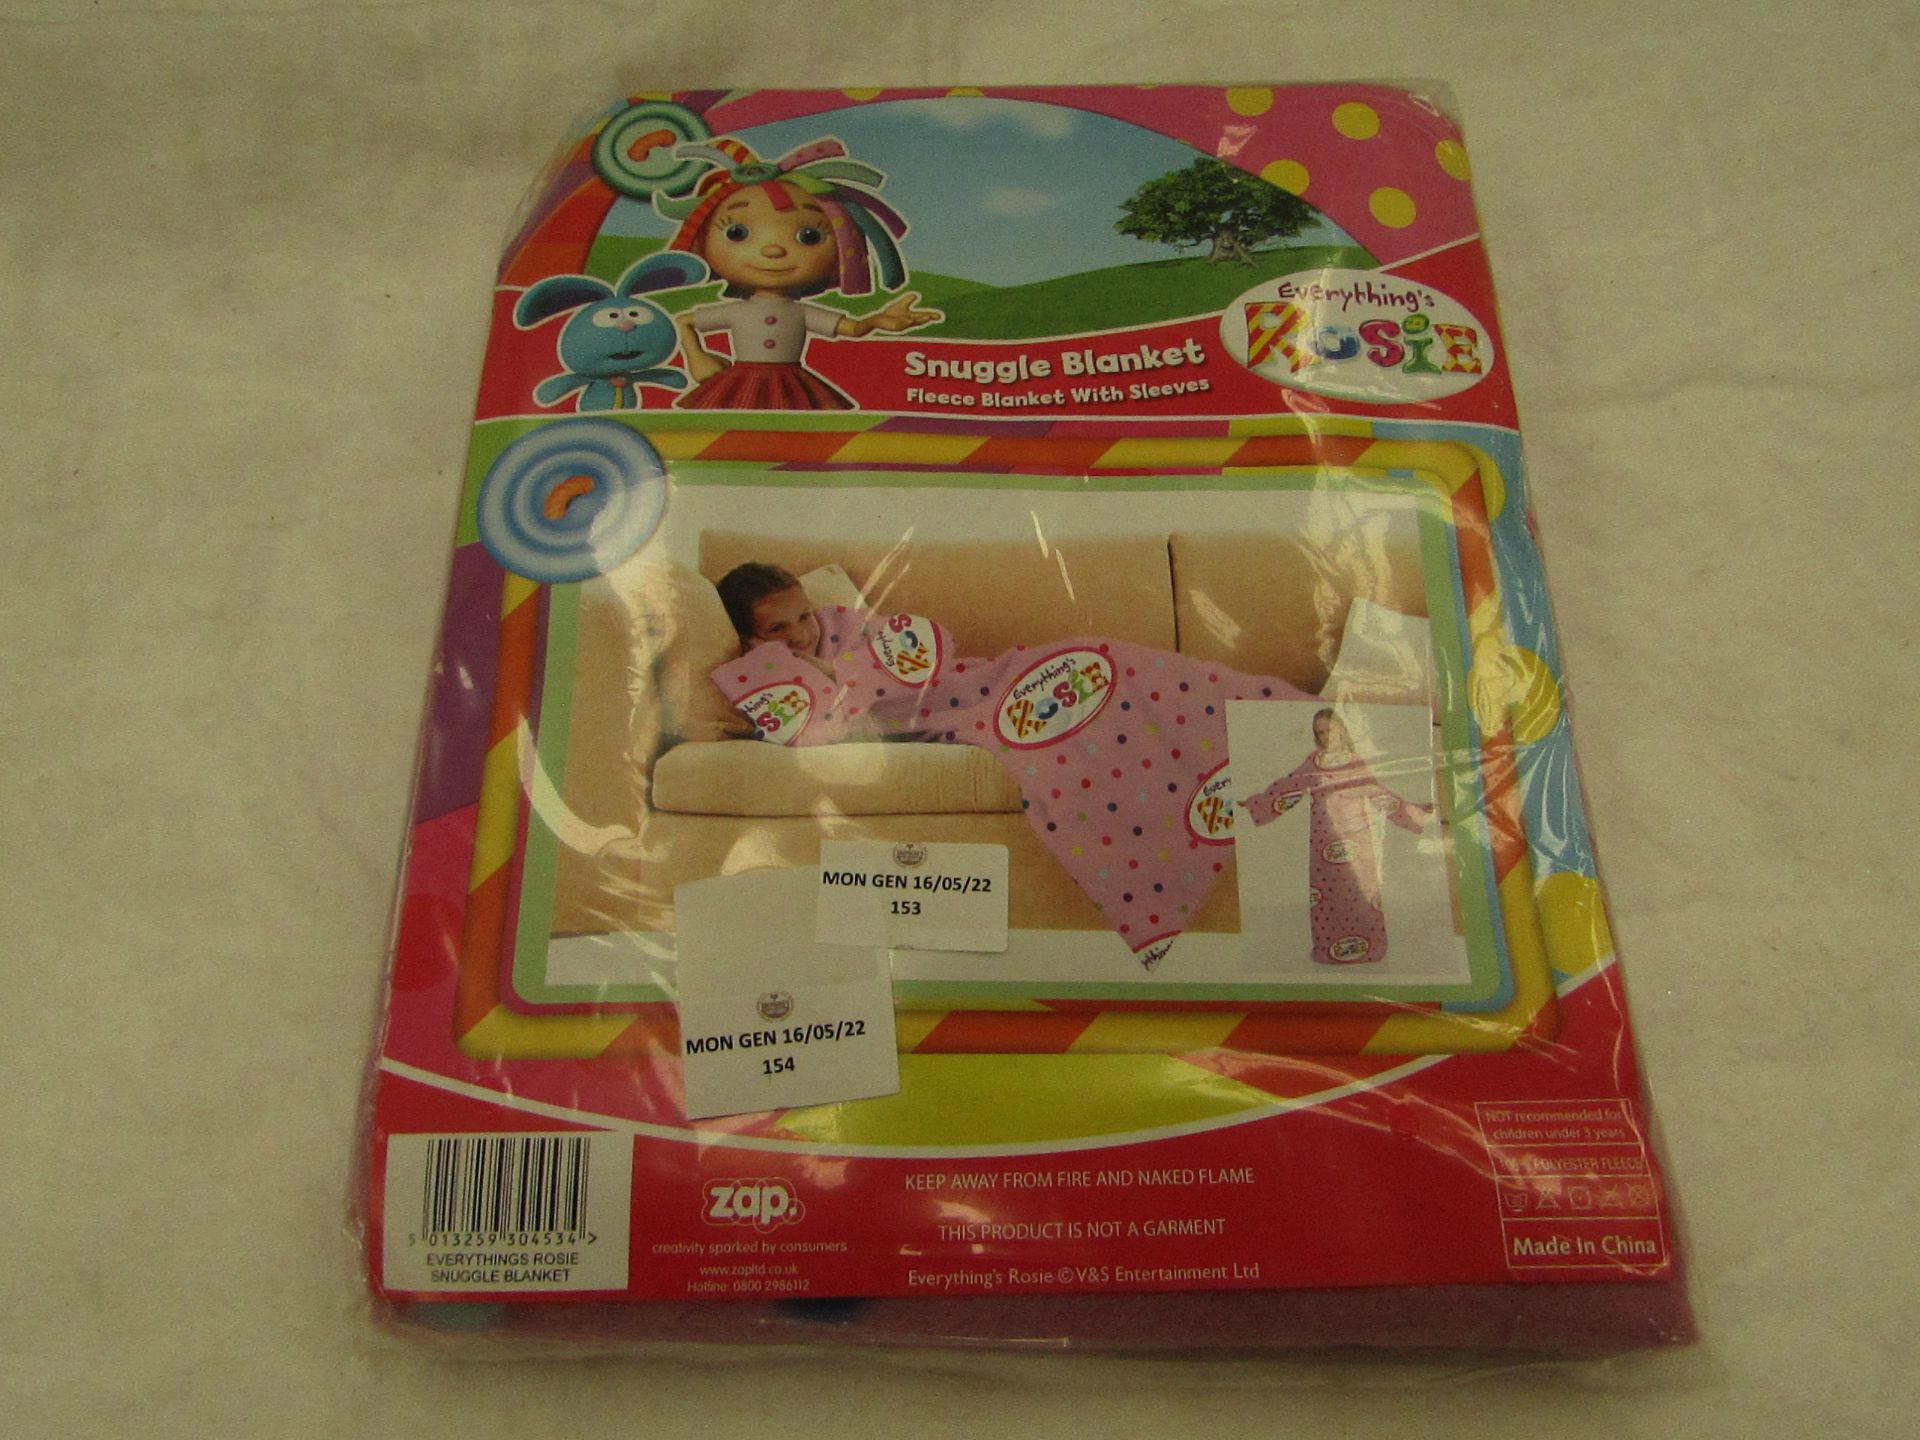 8x Everything's Rosie - Snuggle Fleece Blanket With Sleeves - New & Packaged.